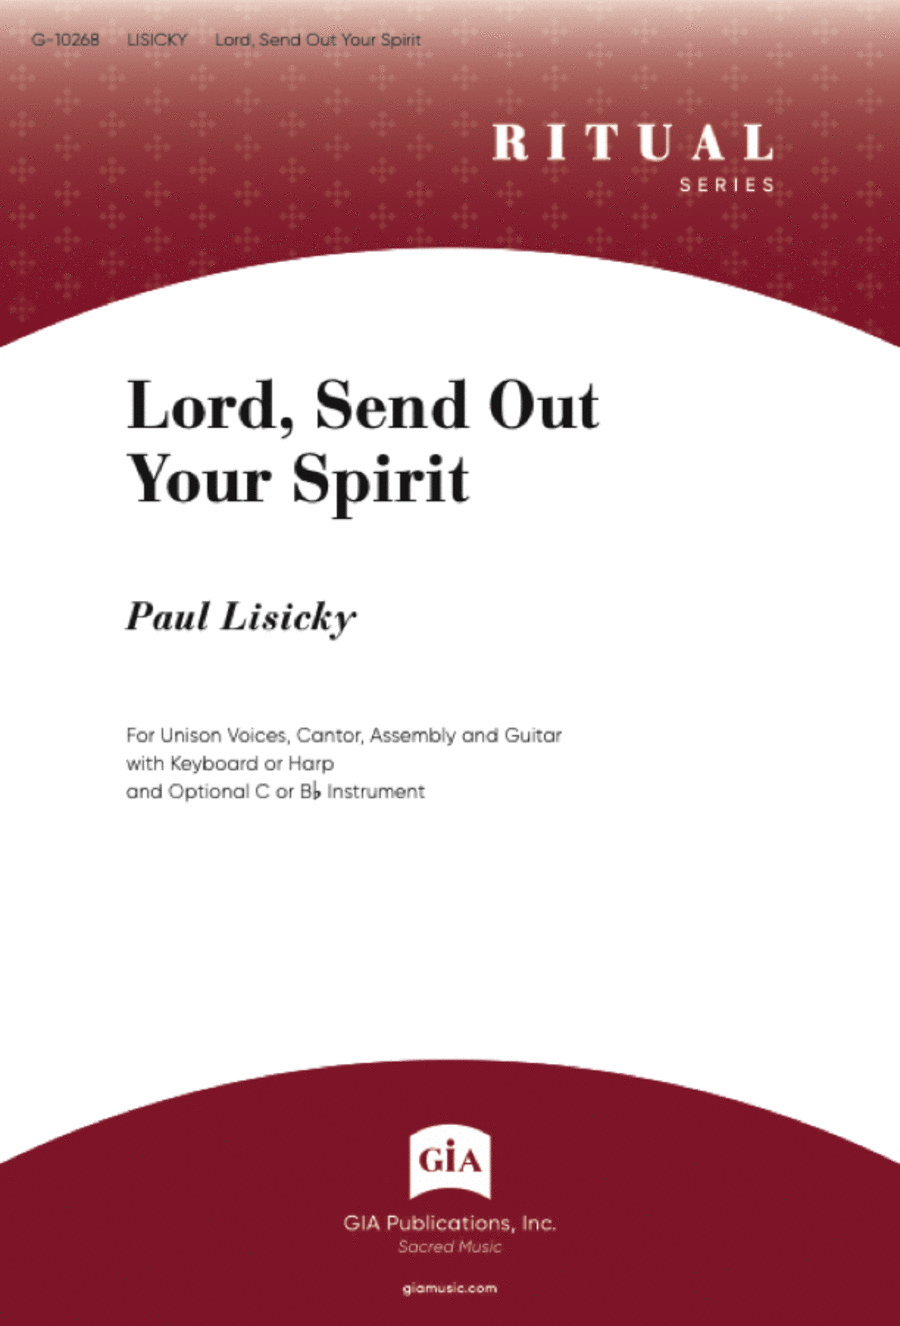 Lord, Send Out Your Spirit